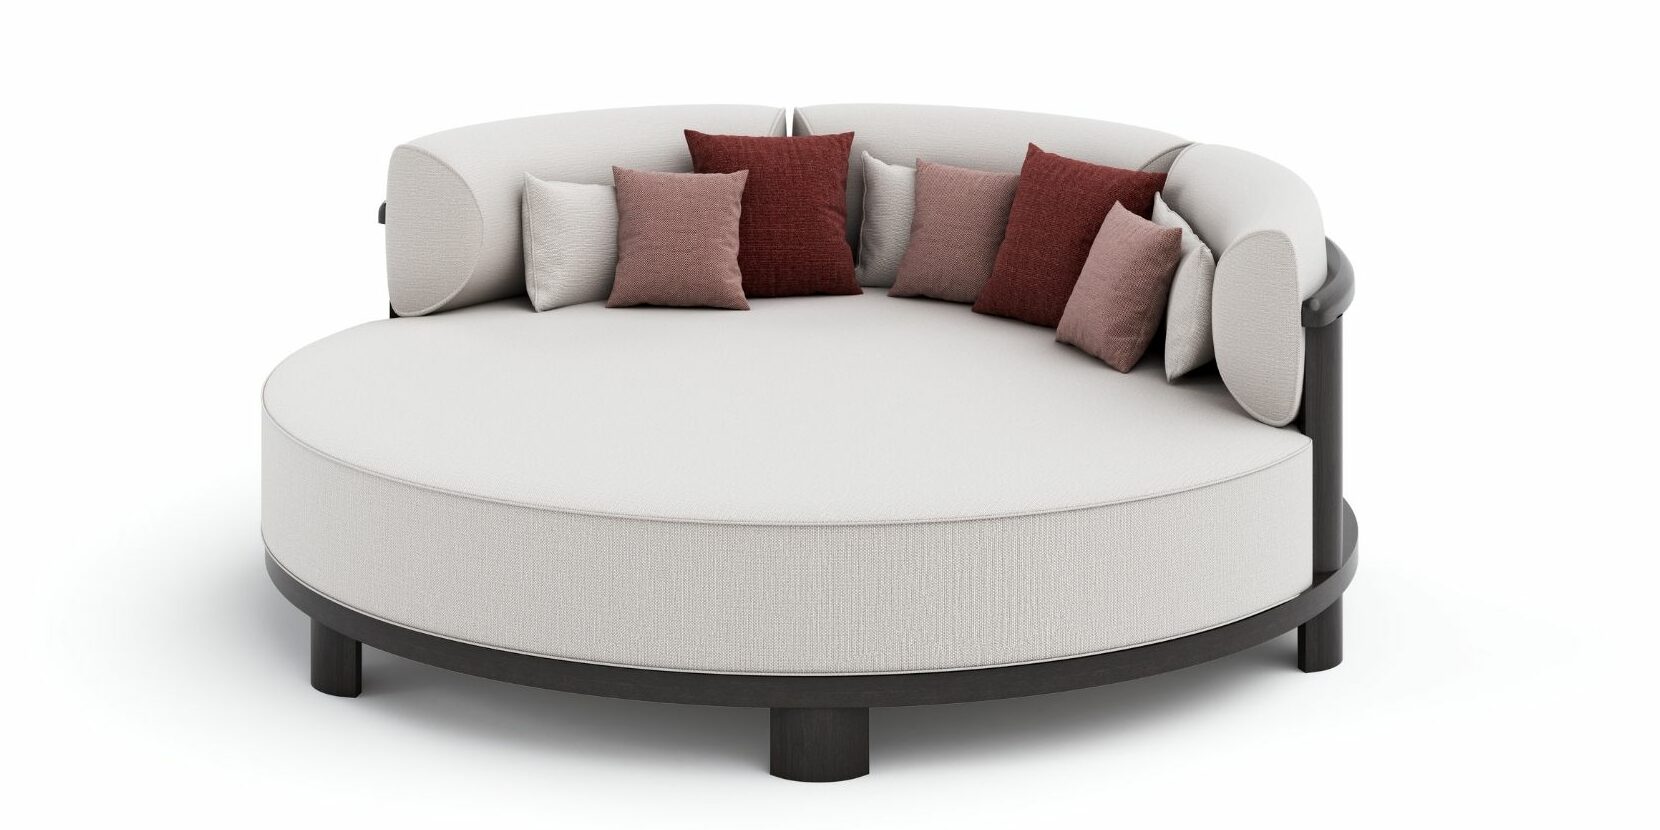 Bolgheri Sofa Buttoned in Outdoor Sofas for Bolgheri collection